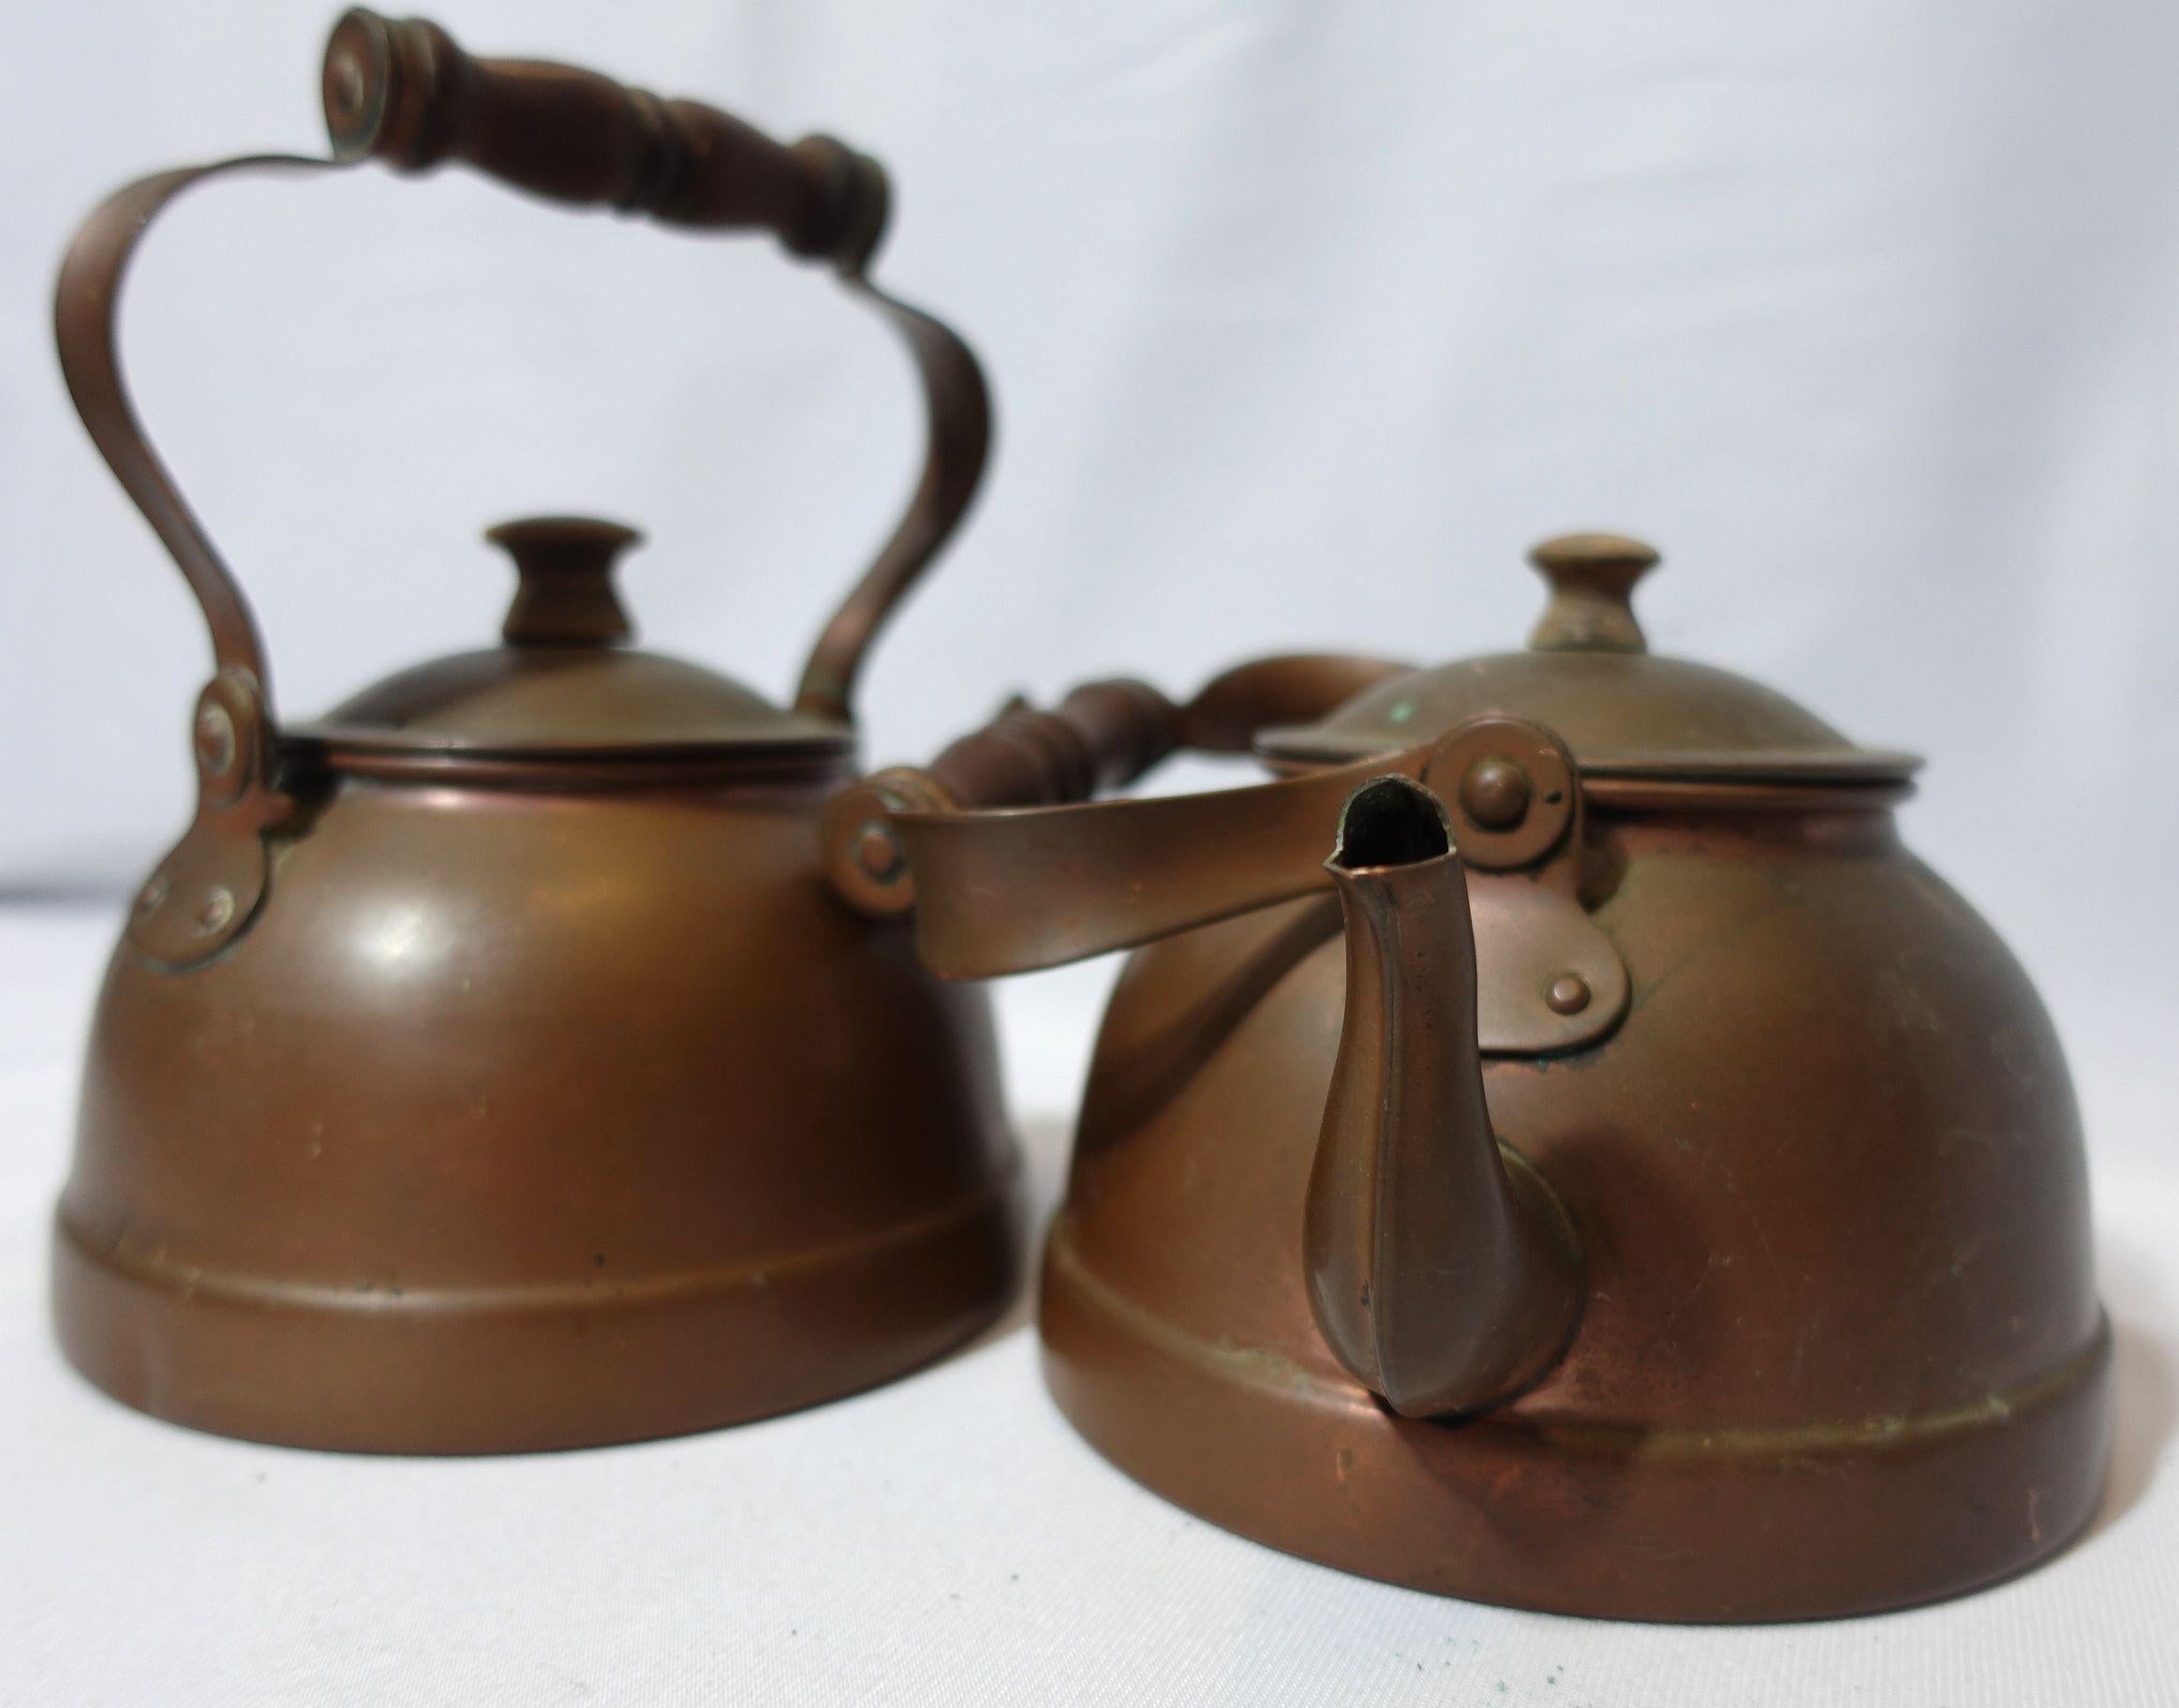 Hand-Crafted Pair of Portugal Copper Tea Kettle, TC#09-1 & 2 For Sale